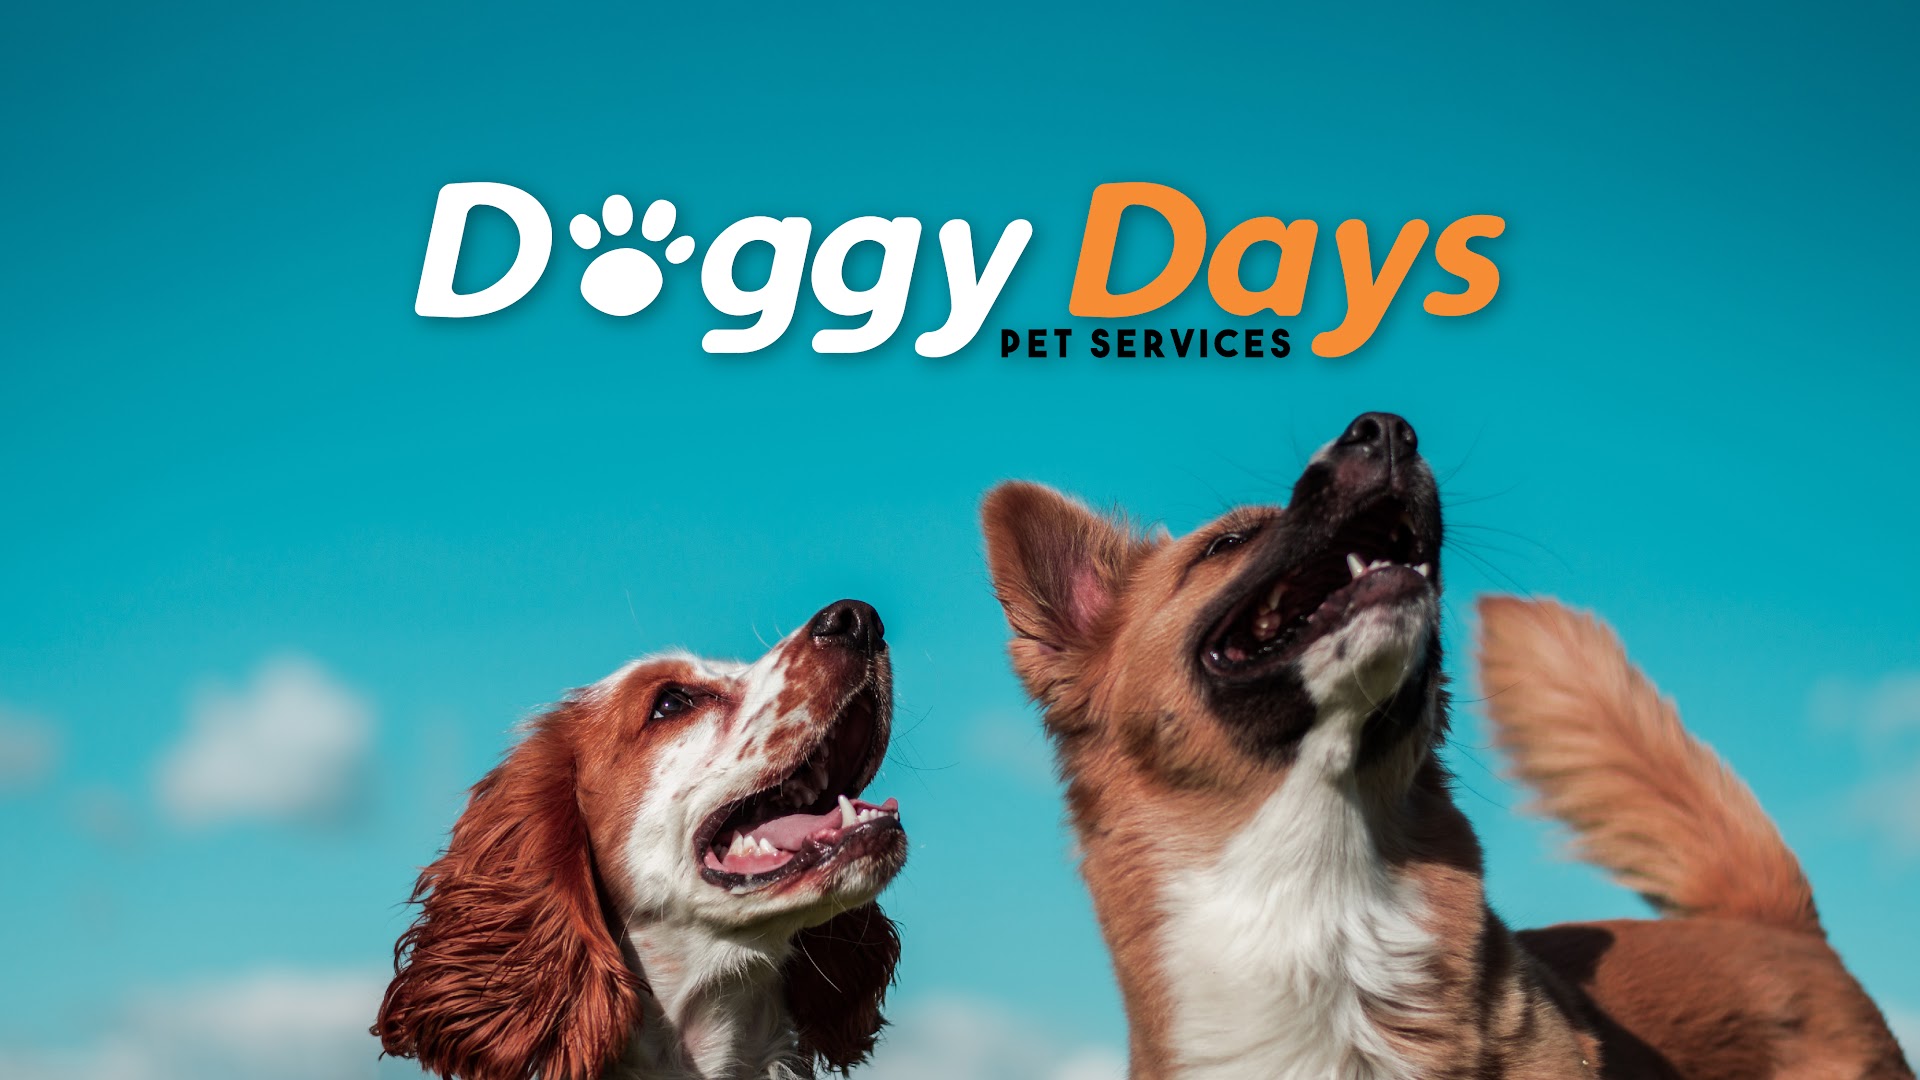 Doggy Days Pet Services